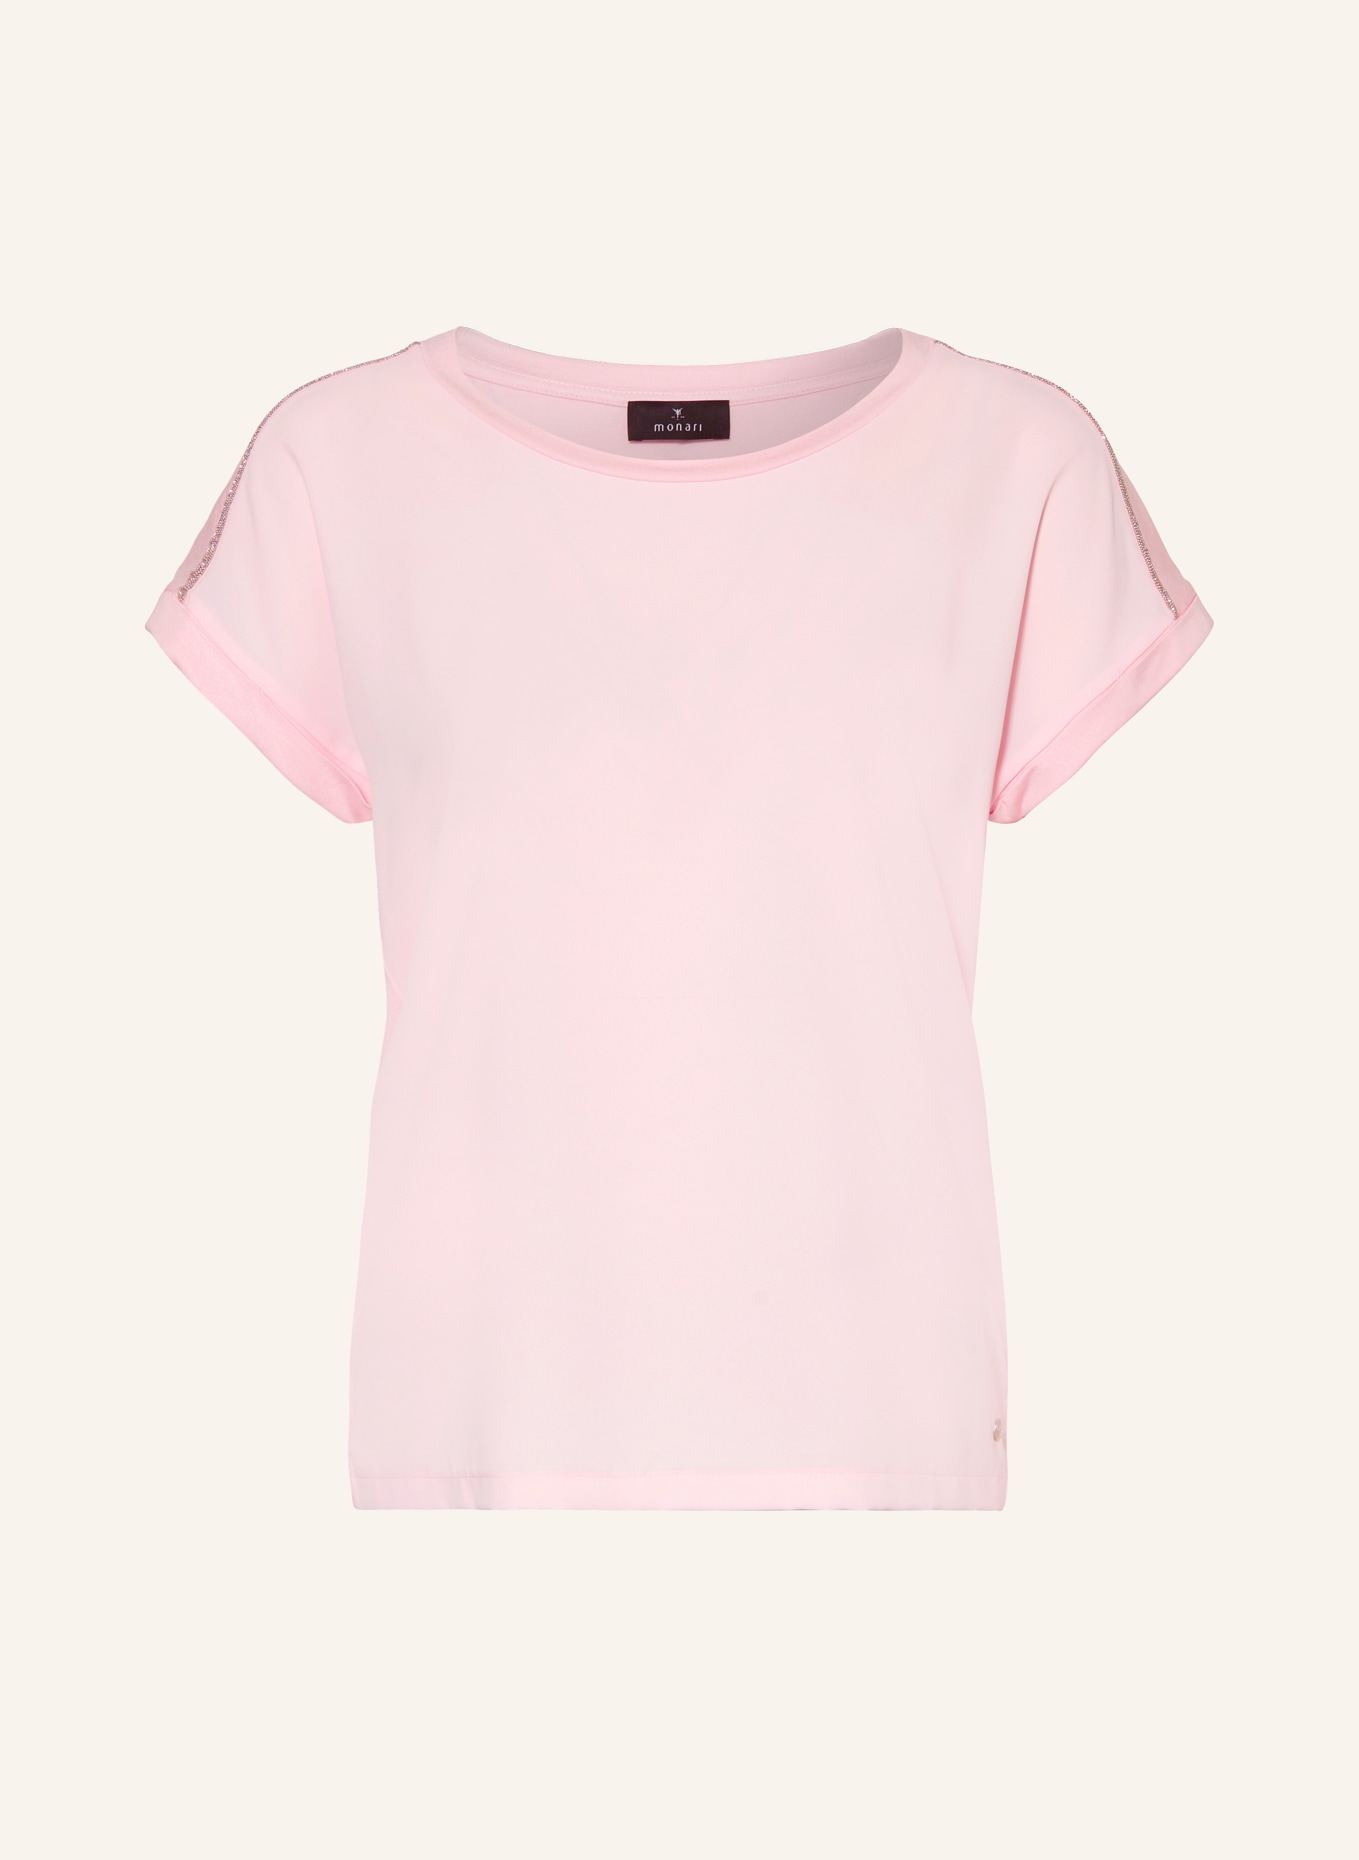 monari T-shirt in mixed materials with decorative beads, Color: PINK (Image 1)